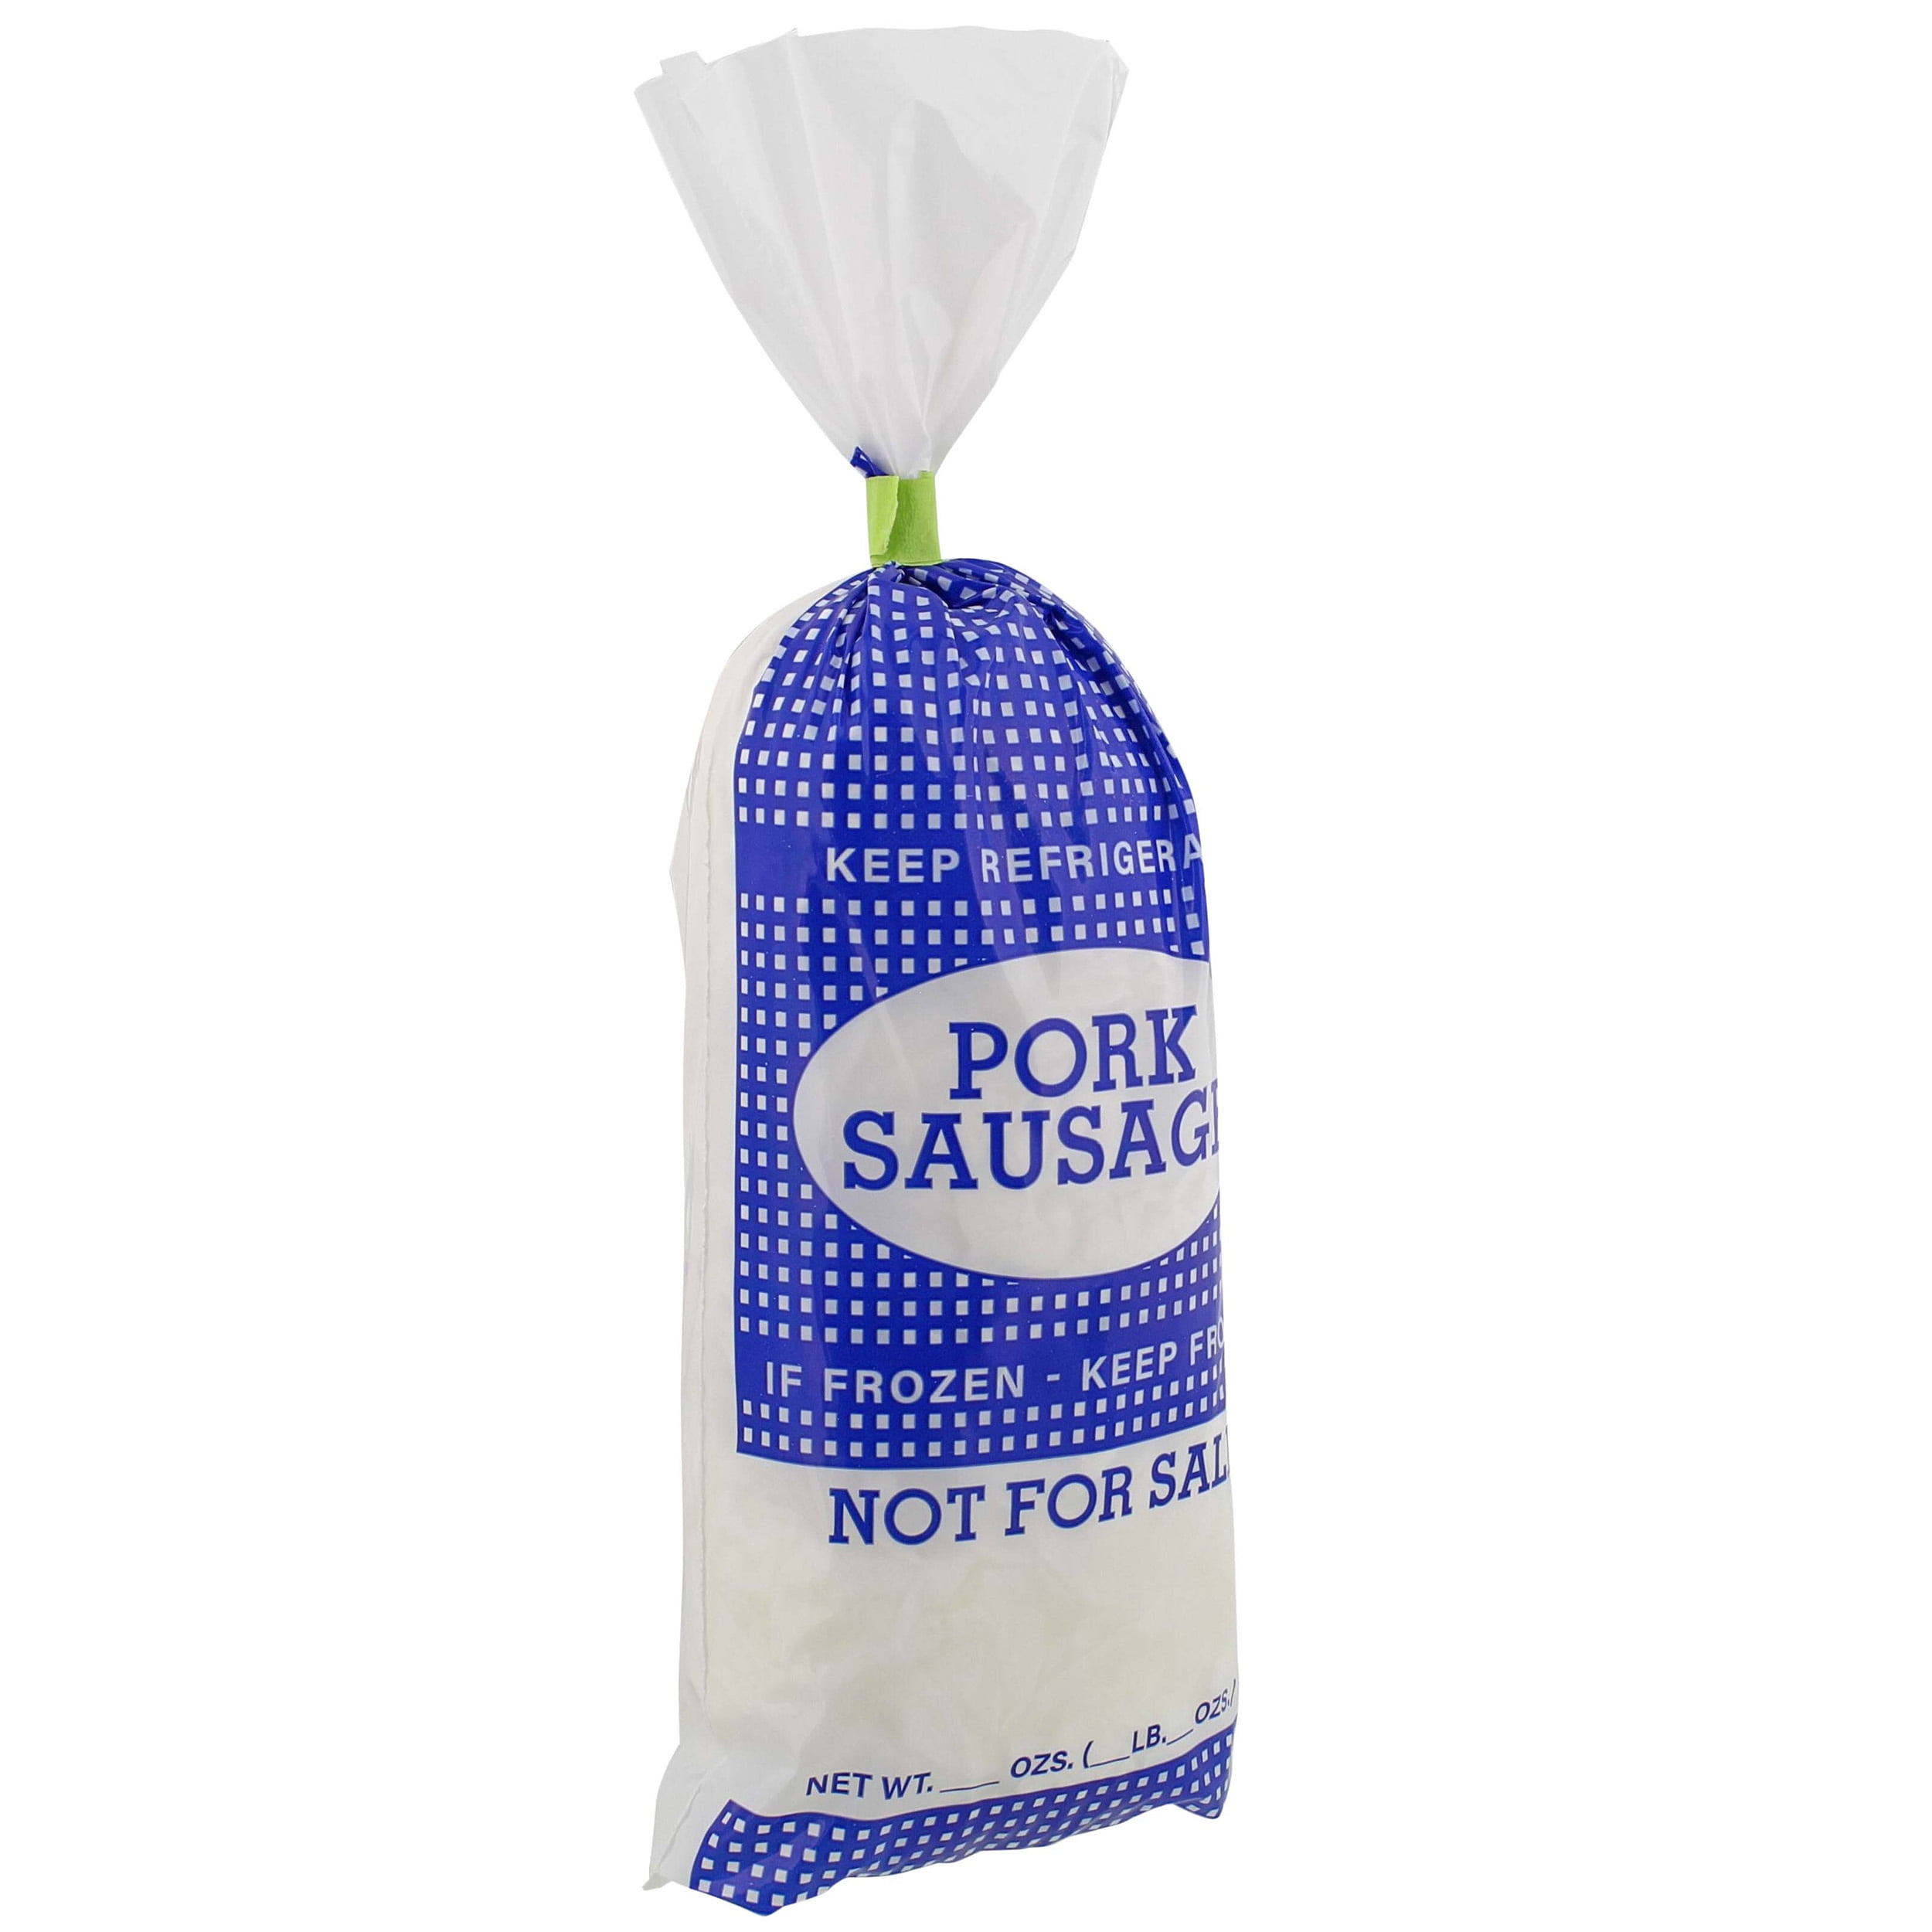 50 Poly Meat Bags - Plain White 1 Lb Capacity Bags